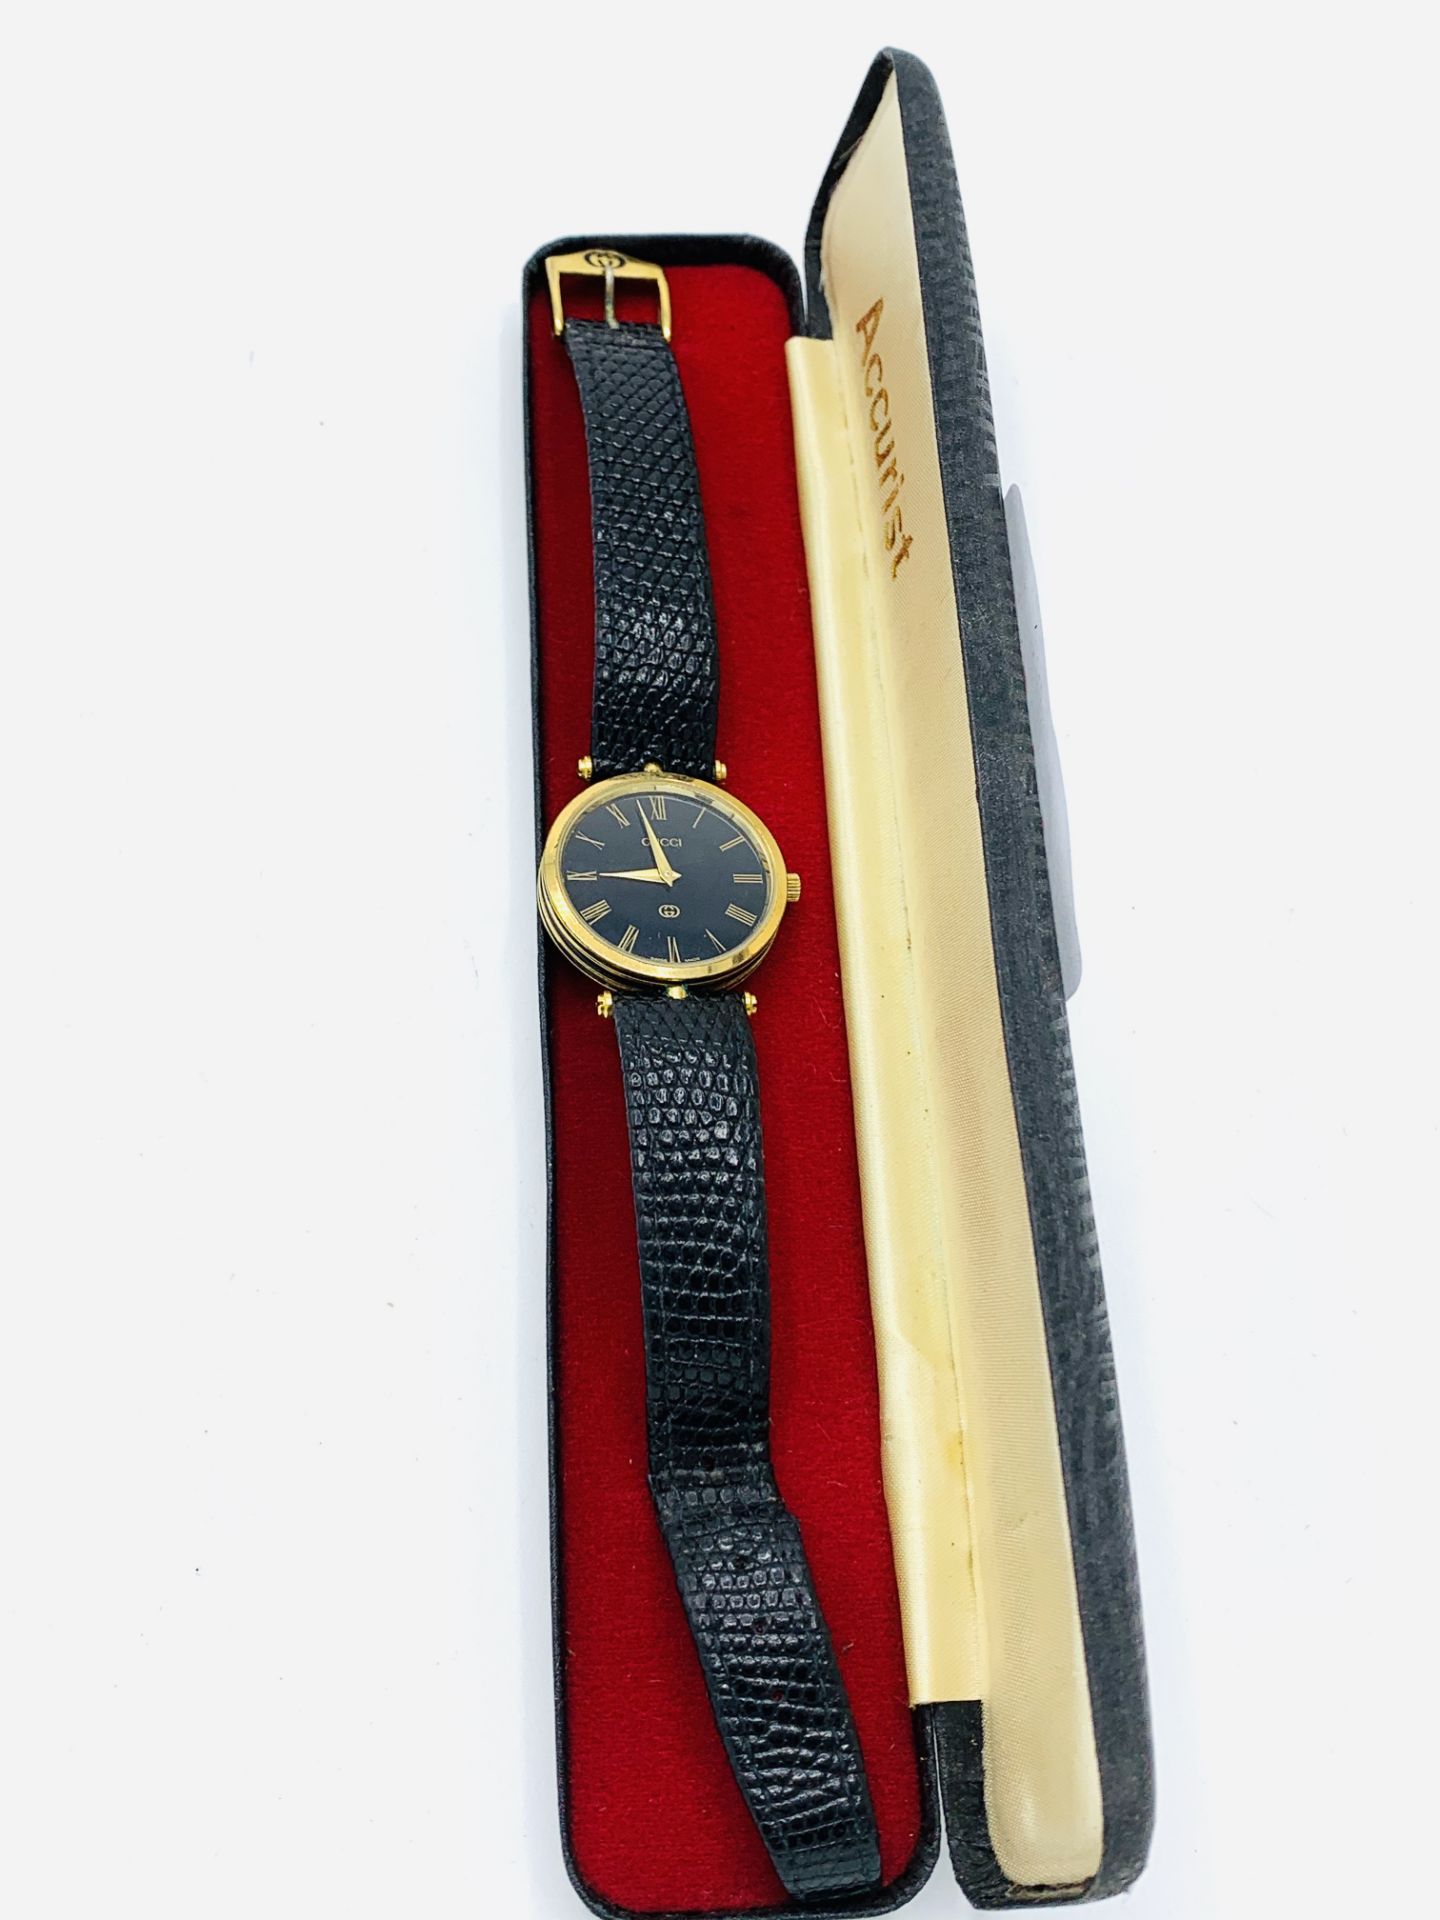 Gucci gold plated and black wrist watch with original strap - Image 4 of 5